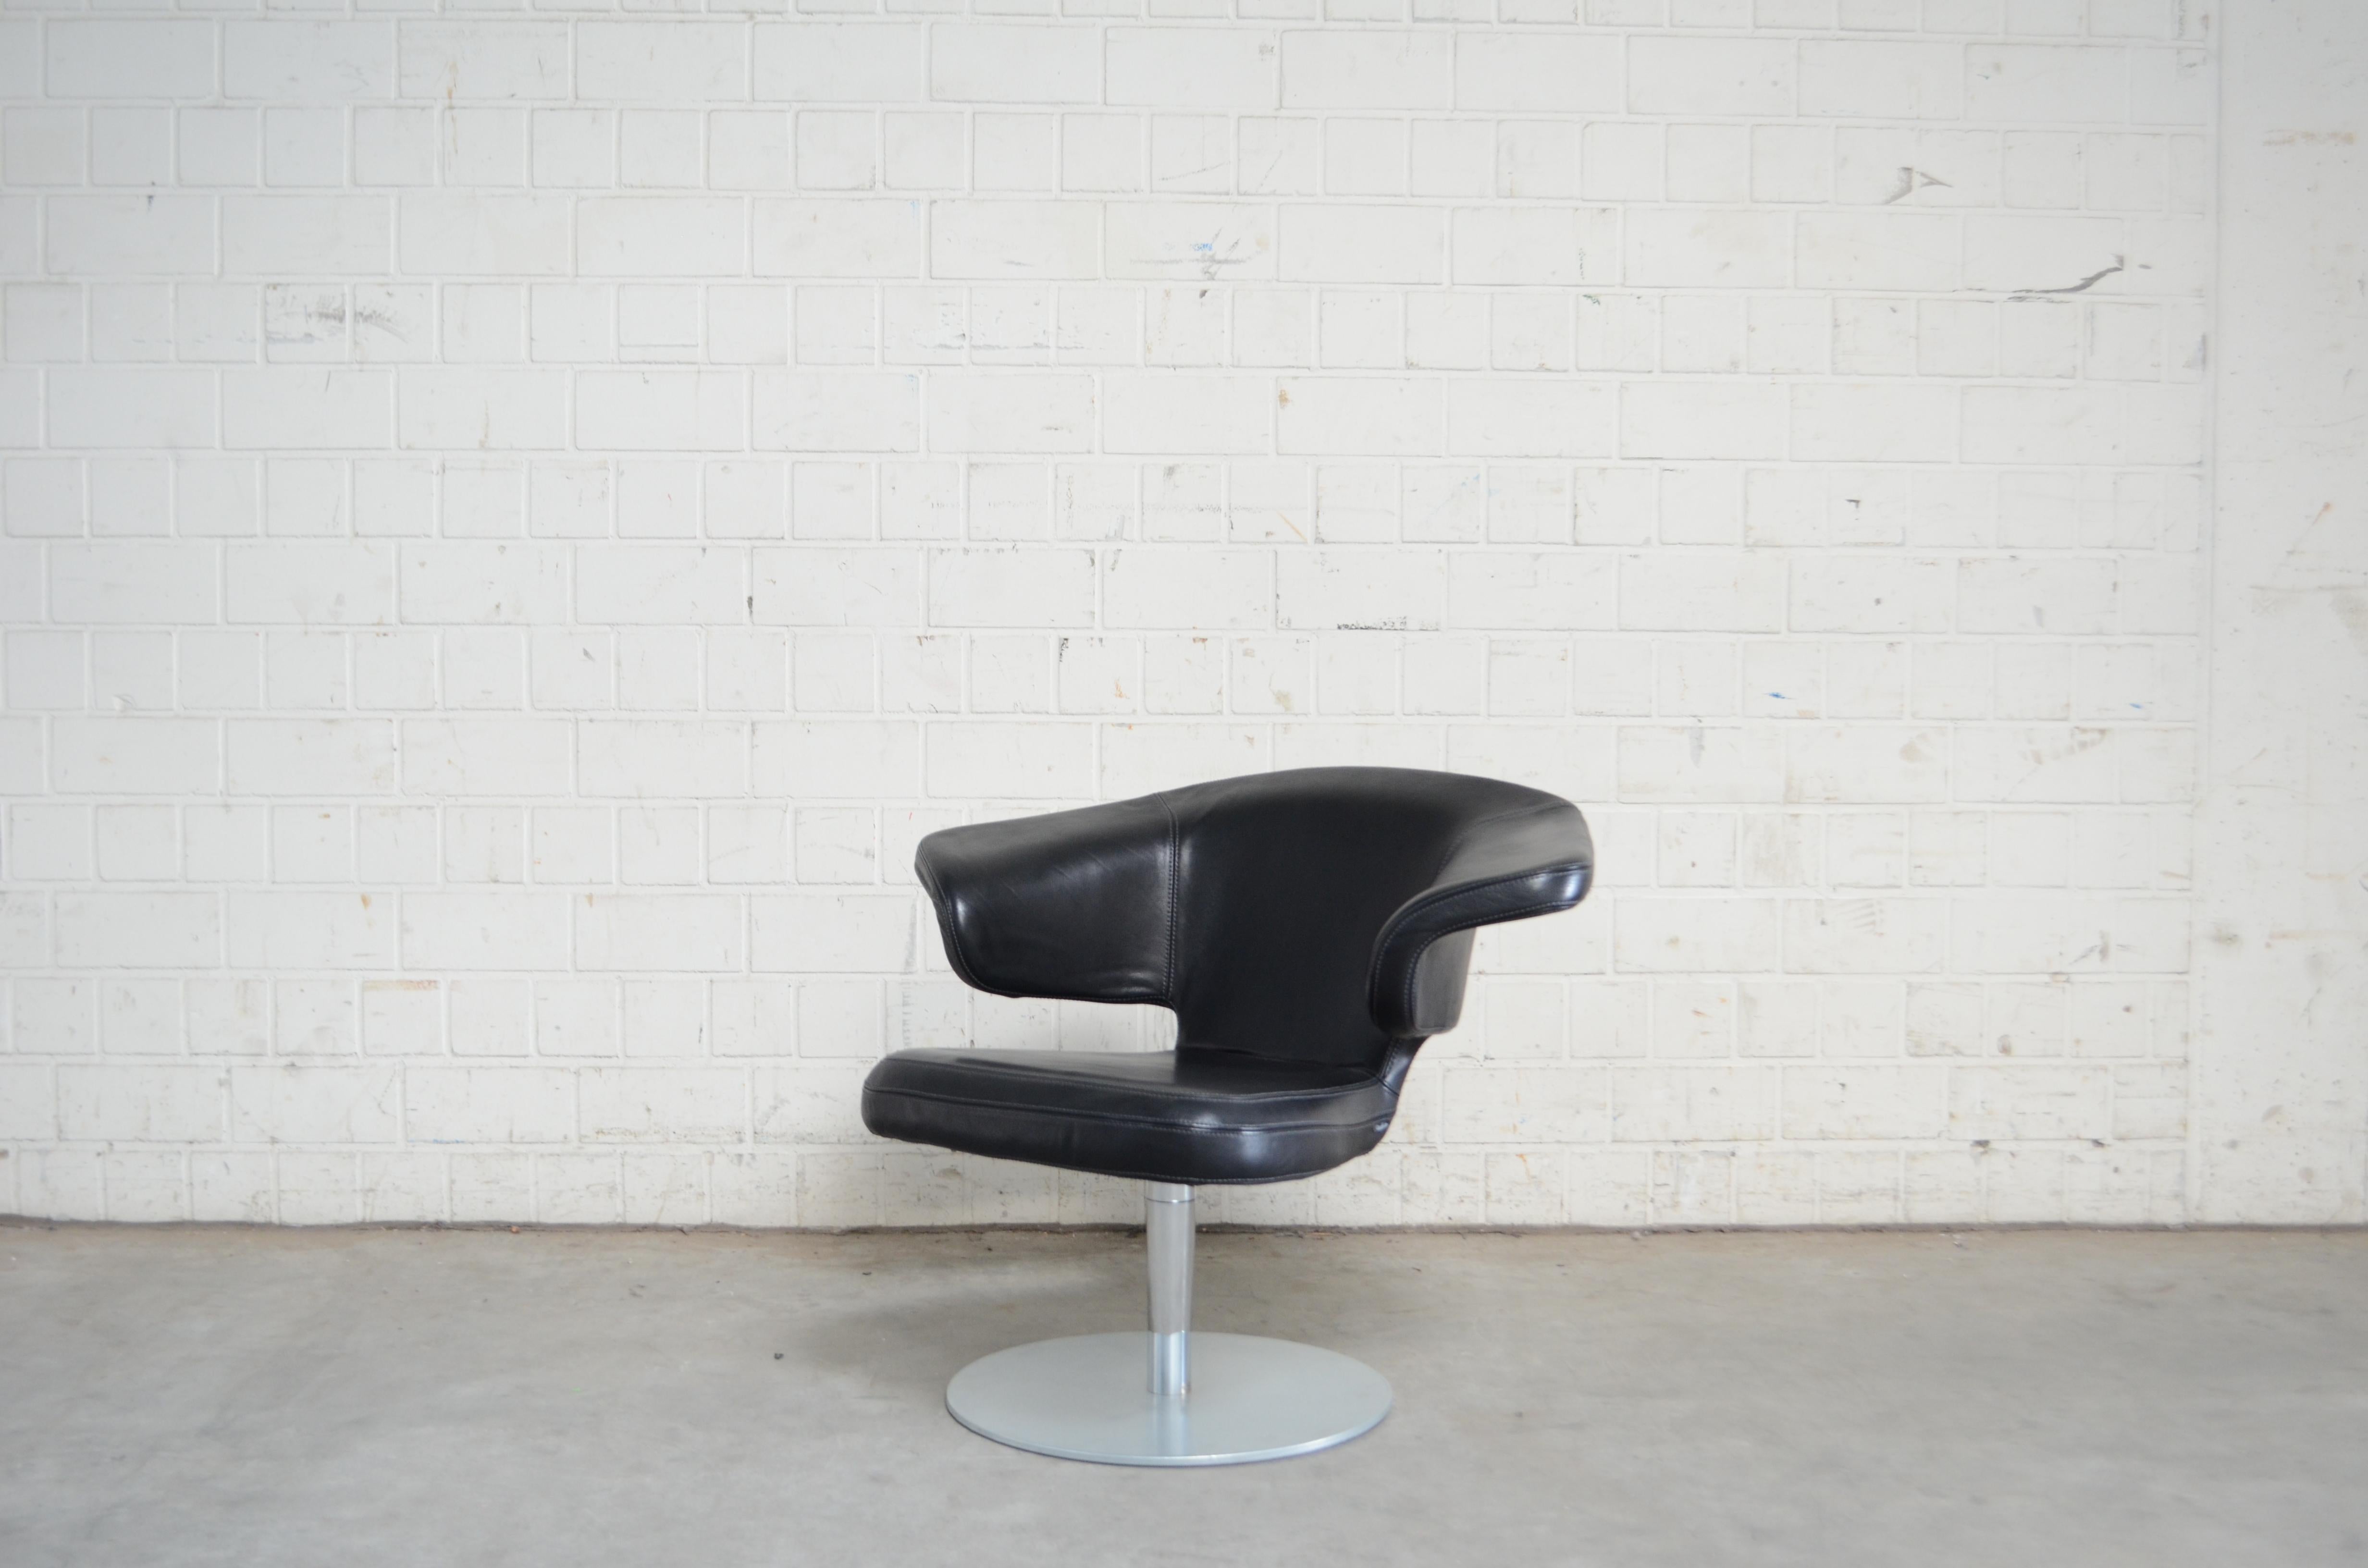 Model Munich lounge chair designed by Sauerbruch & Hutton. 
Manufactured by Classicon.
This object is a rare and unique prototype with a metal swivel base that never was available on the market.
Black aniline leather with grey stitches.